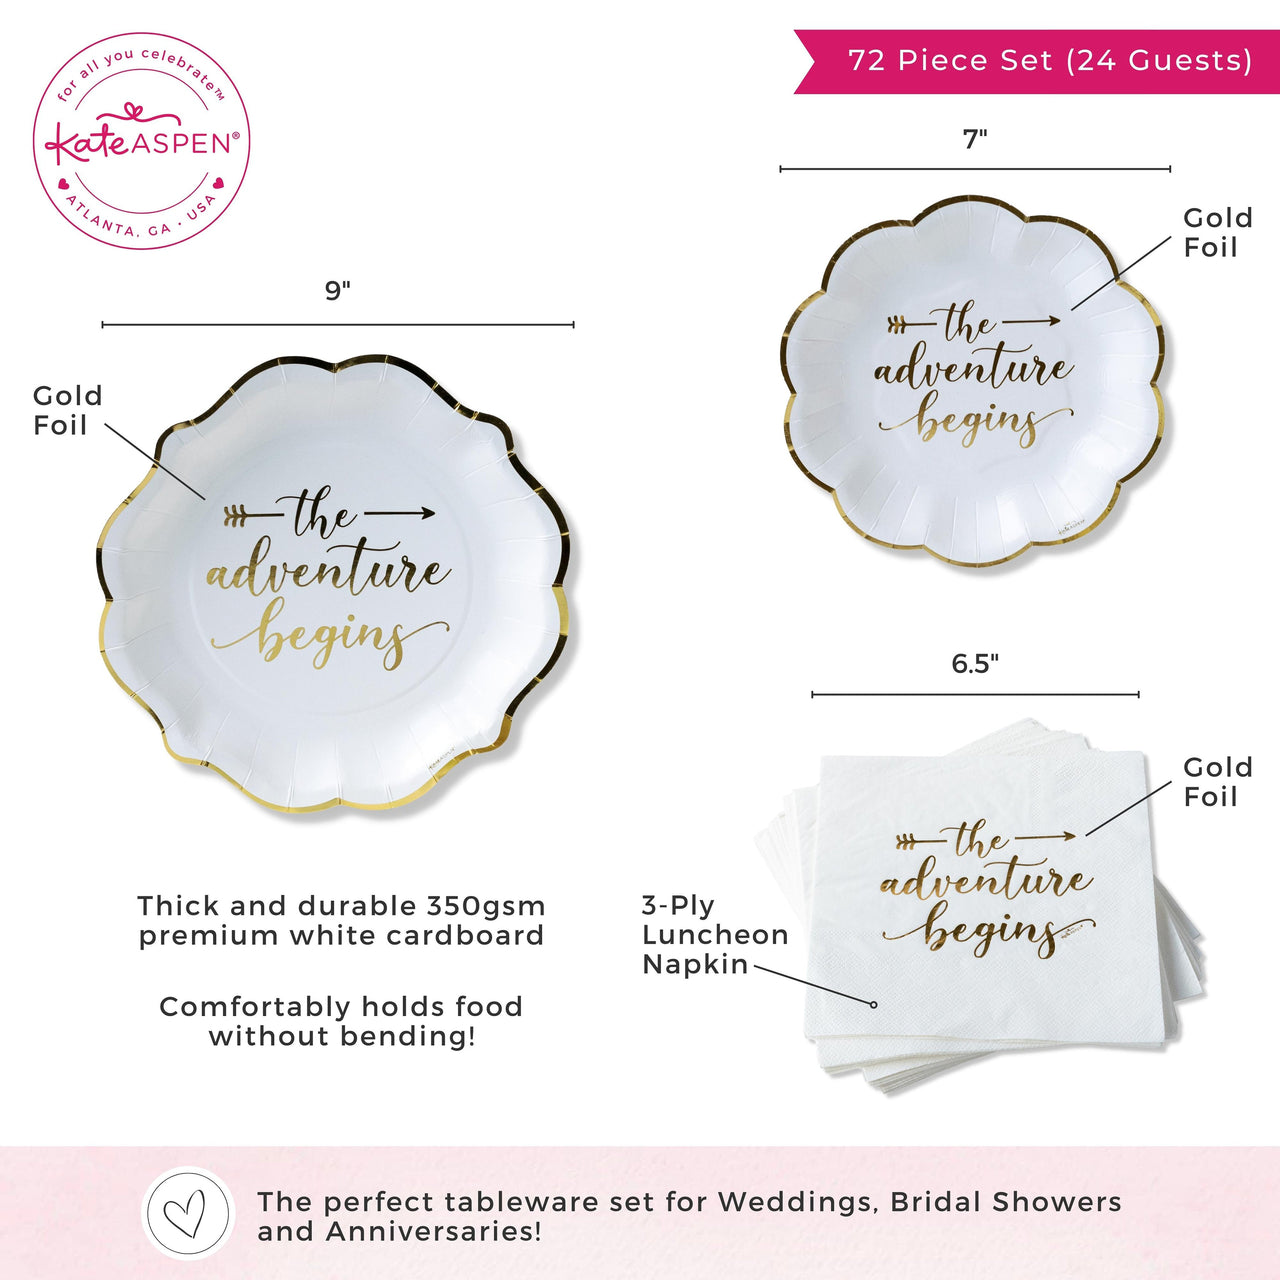 The Adventure Begins 72 Piece Party Tableware Set (24 Guests) - Alternate Image 6 | My Wedding Favors